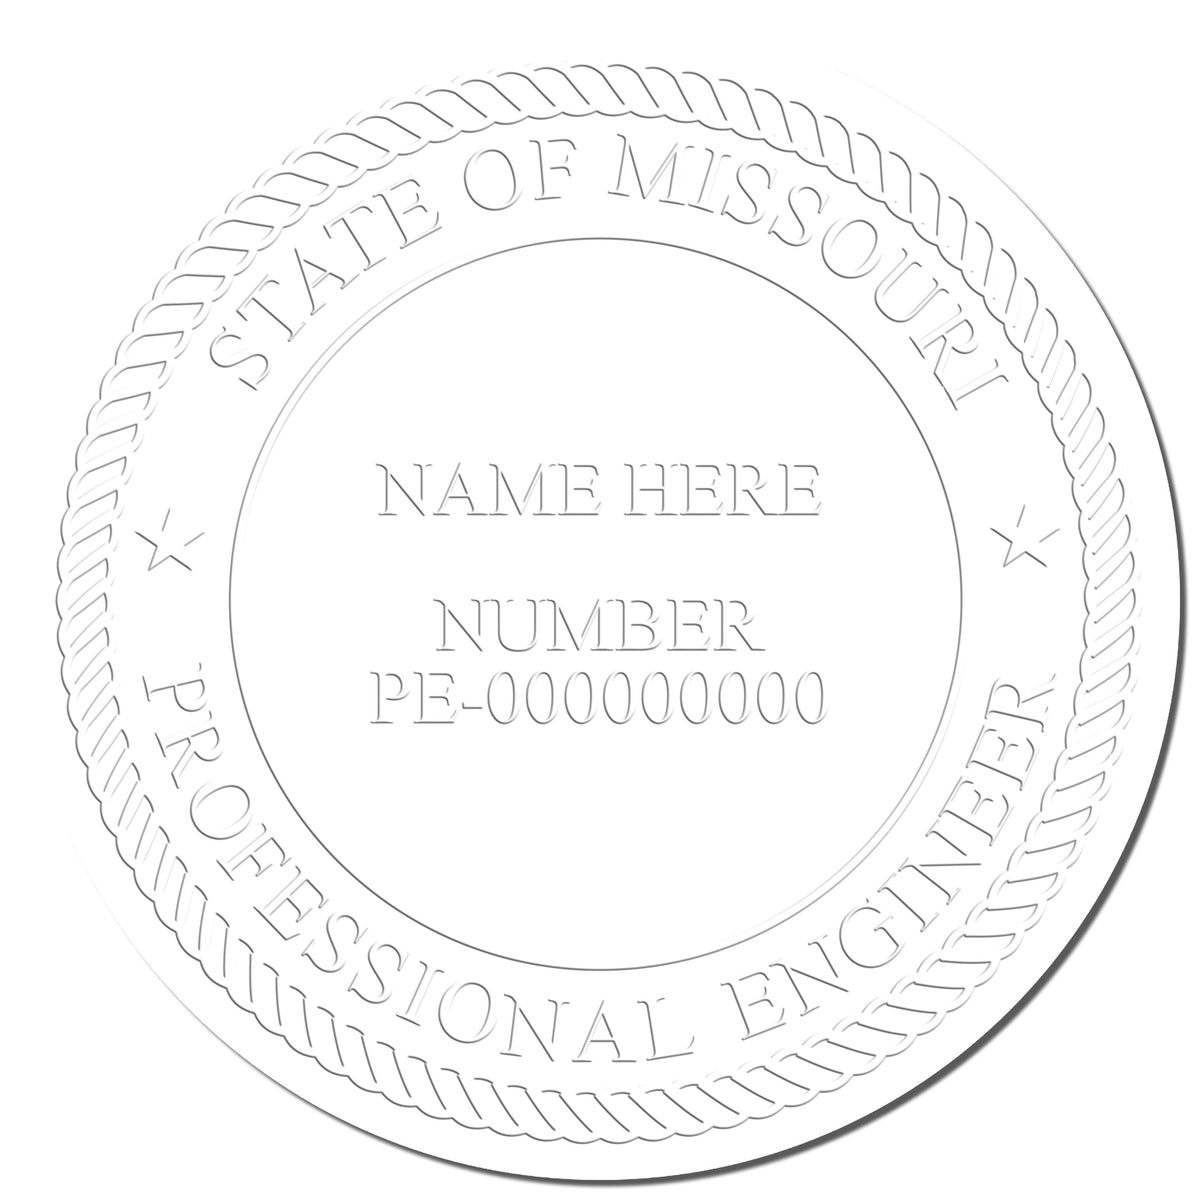 Another Example of a stamped impression of the Missouri Engineer Desk Seal on a piece of office paper.